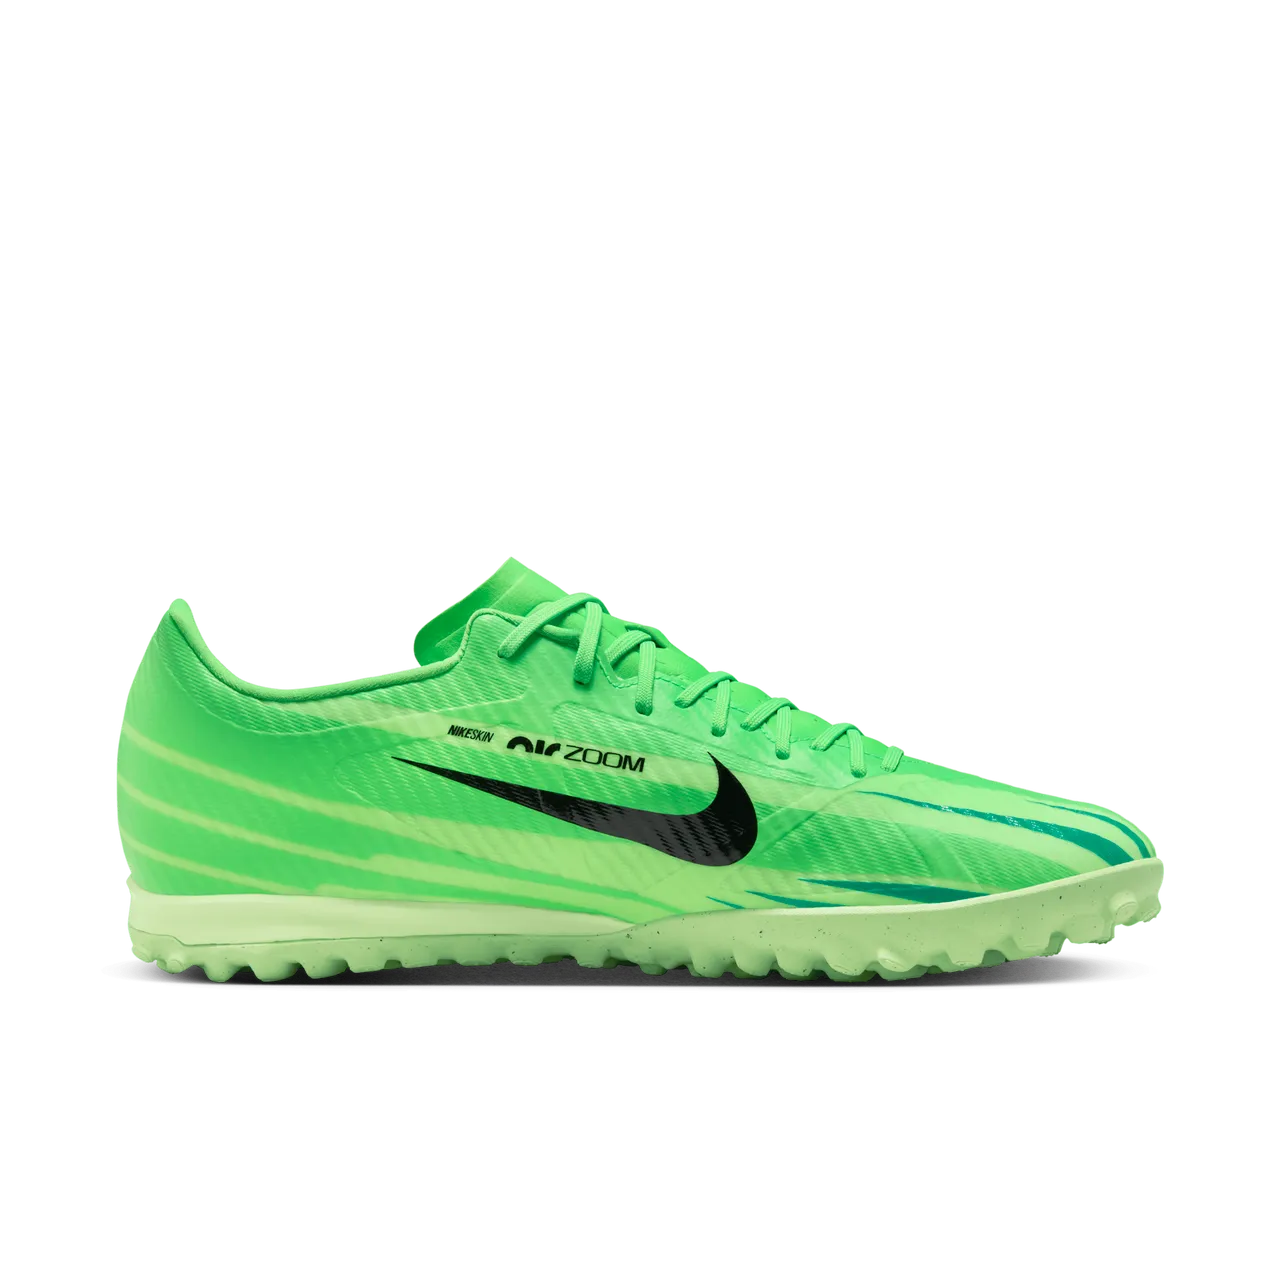 Nike Vapor 15 Academy Mercurial Dream Speed TF Low-Top Football Shoes - Green